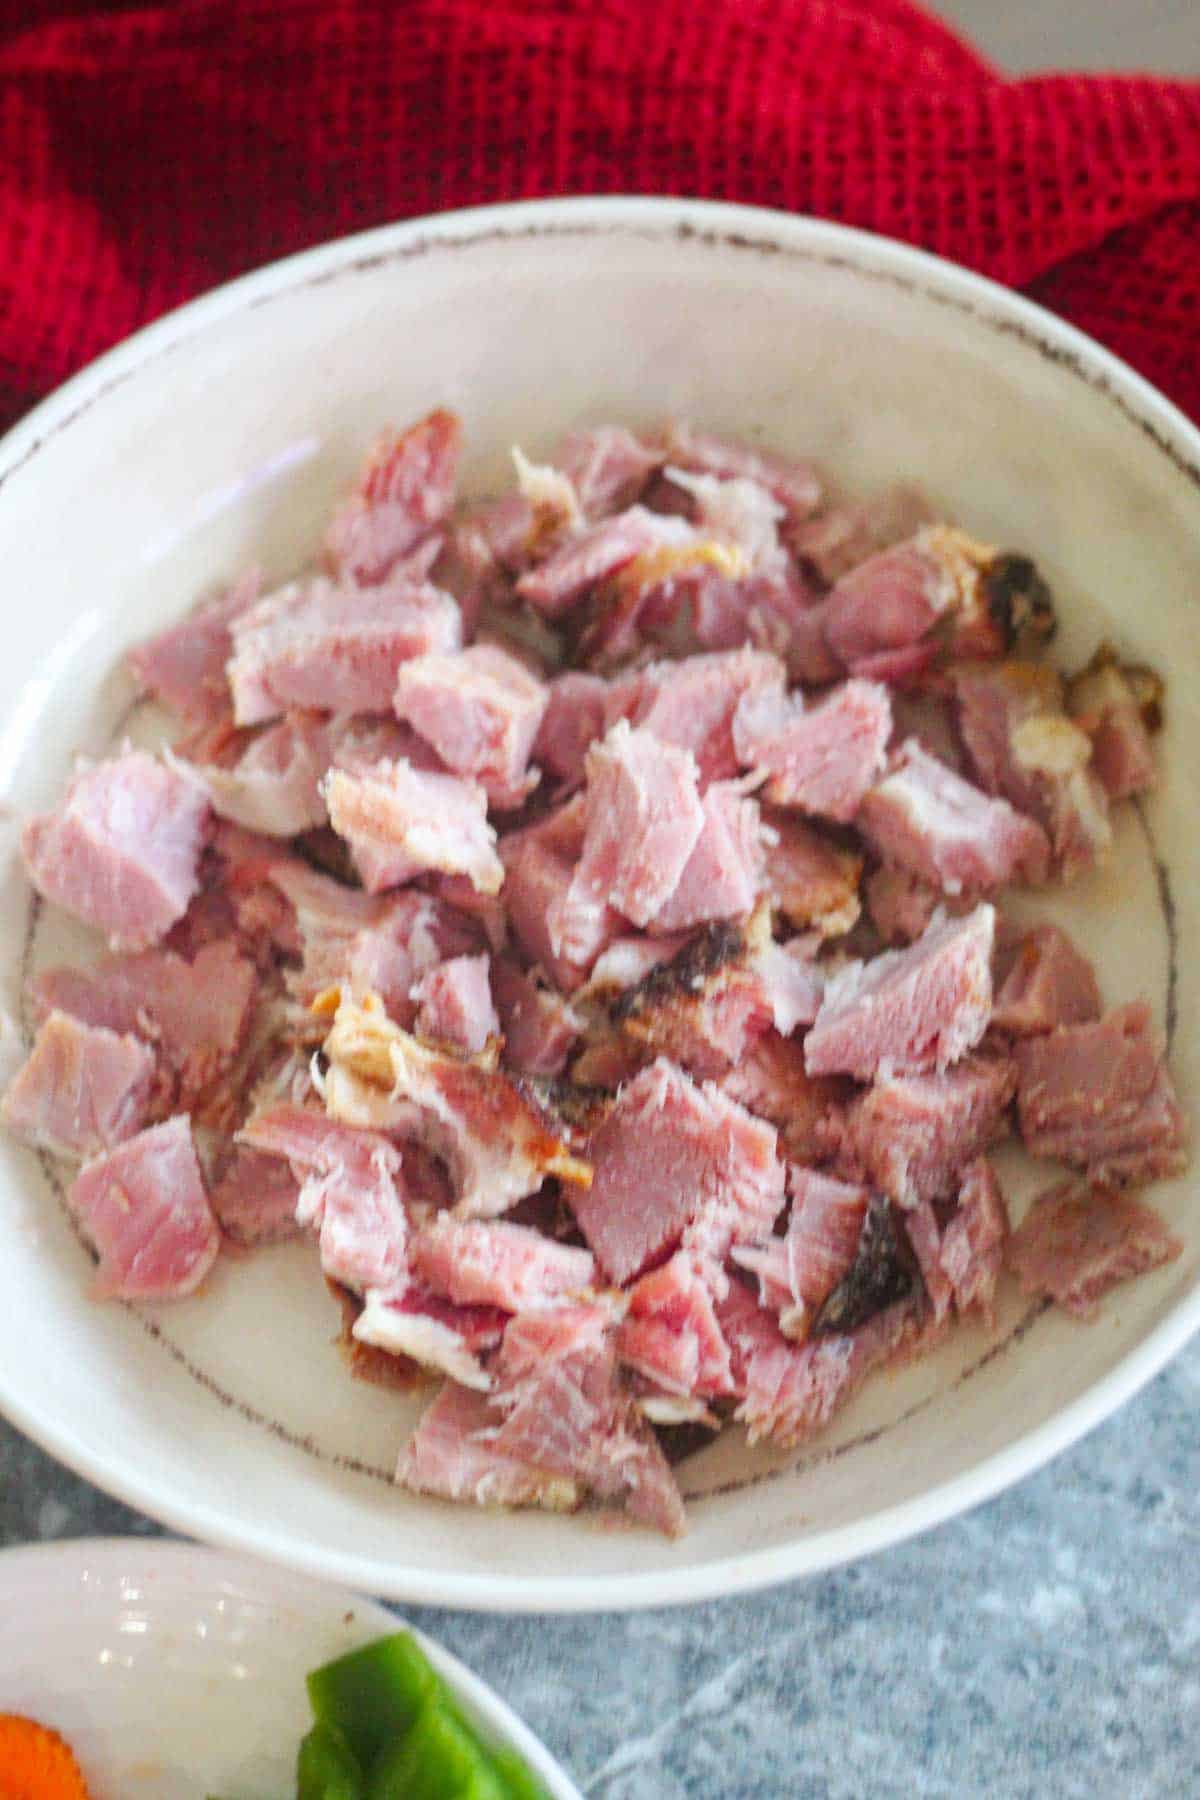 Diced ham for soup in a plate.